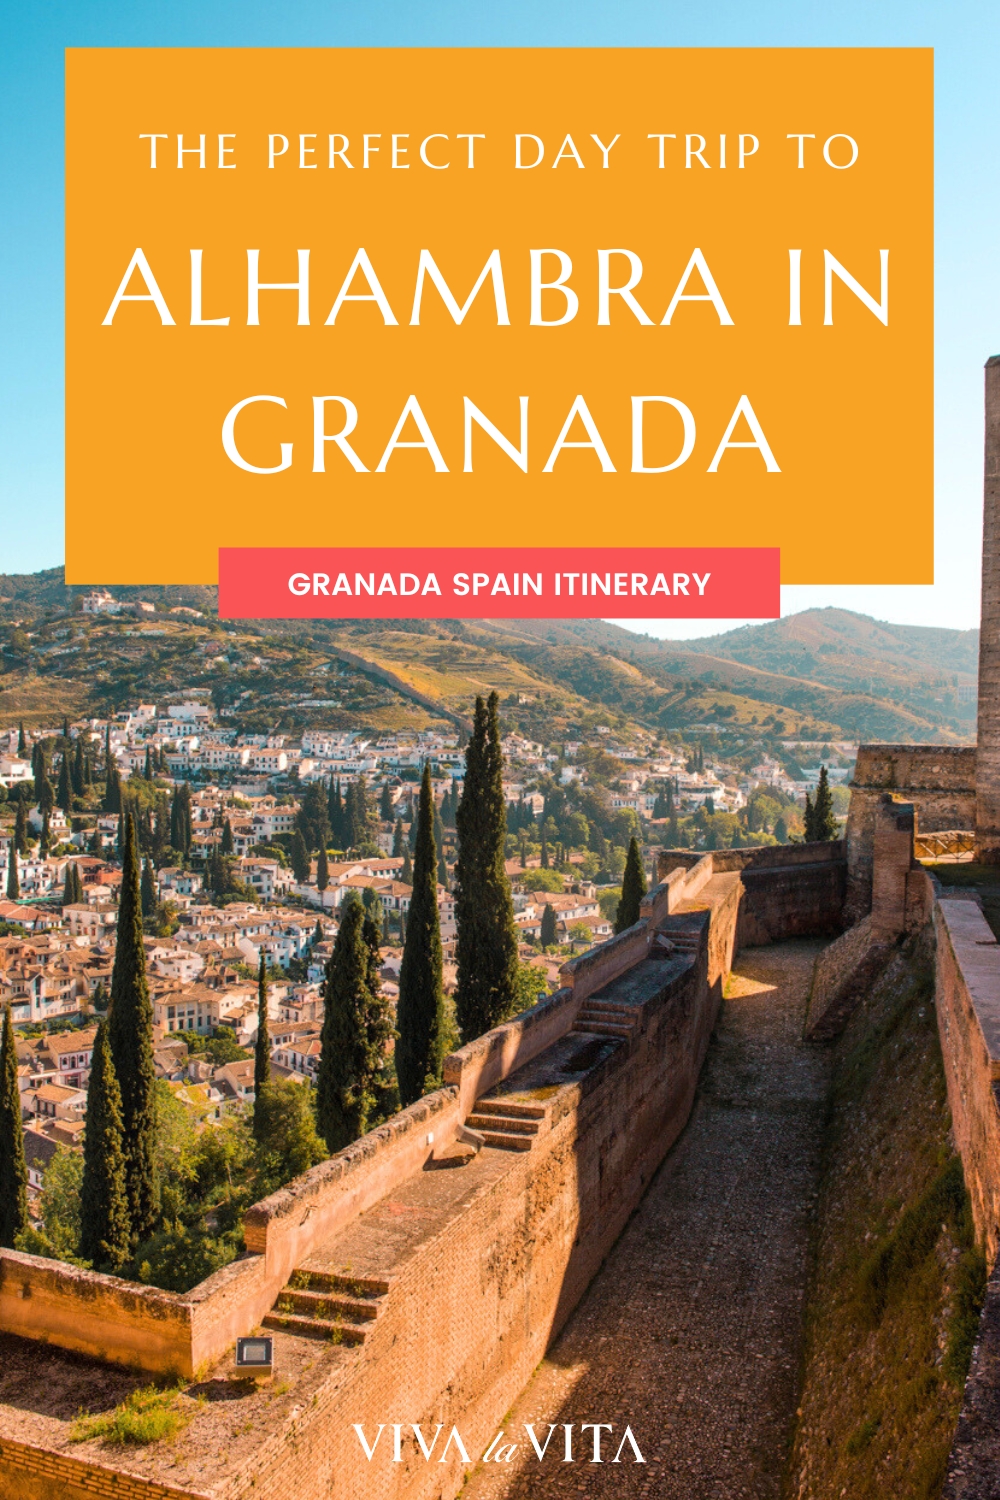 Pinterest image showing the view from the Alcazaba of Granada, with a headline that reads: The perfect day trip to Alhambra in Granada, Granada Spain Itinerary.